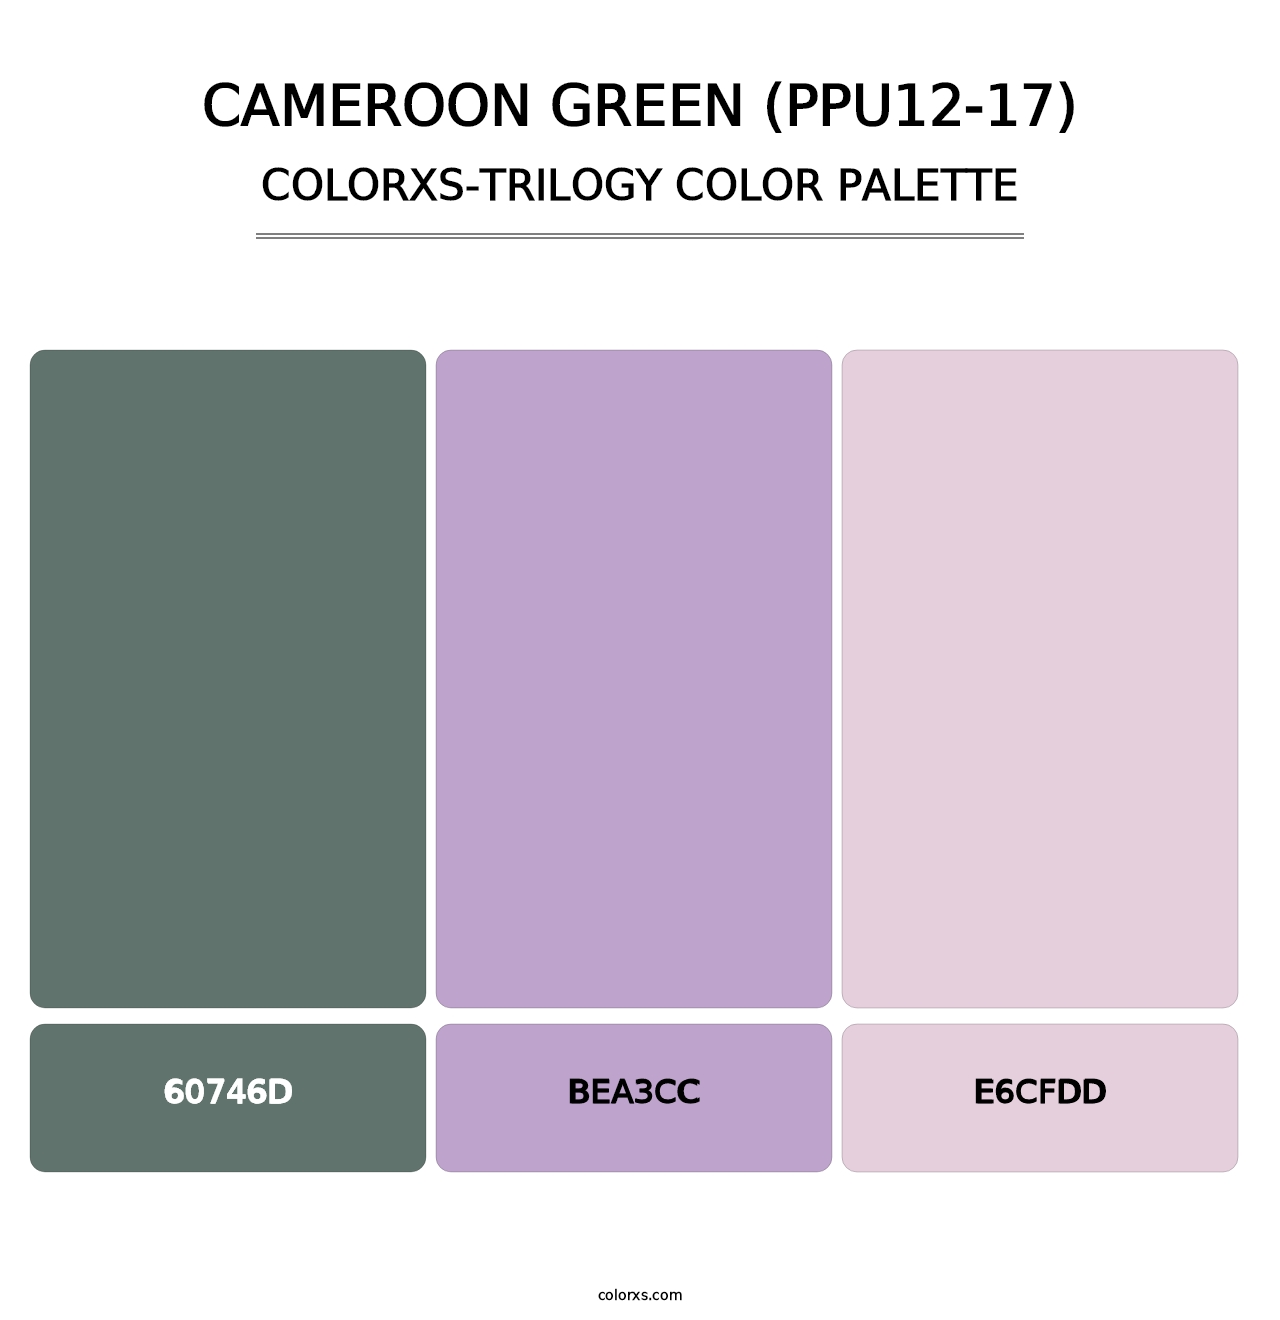 Cameroon Green (PPU12-17) - Colorxs Trilogy Palette